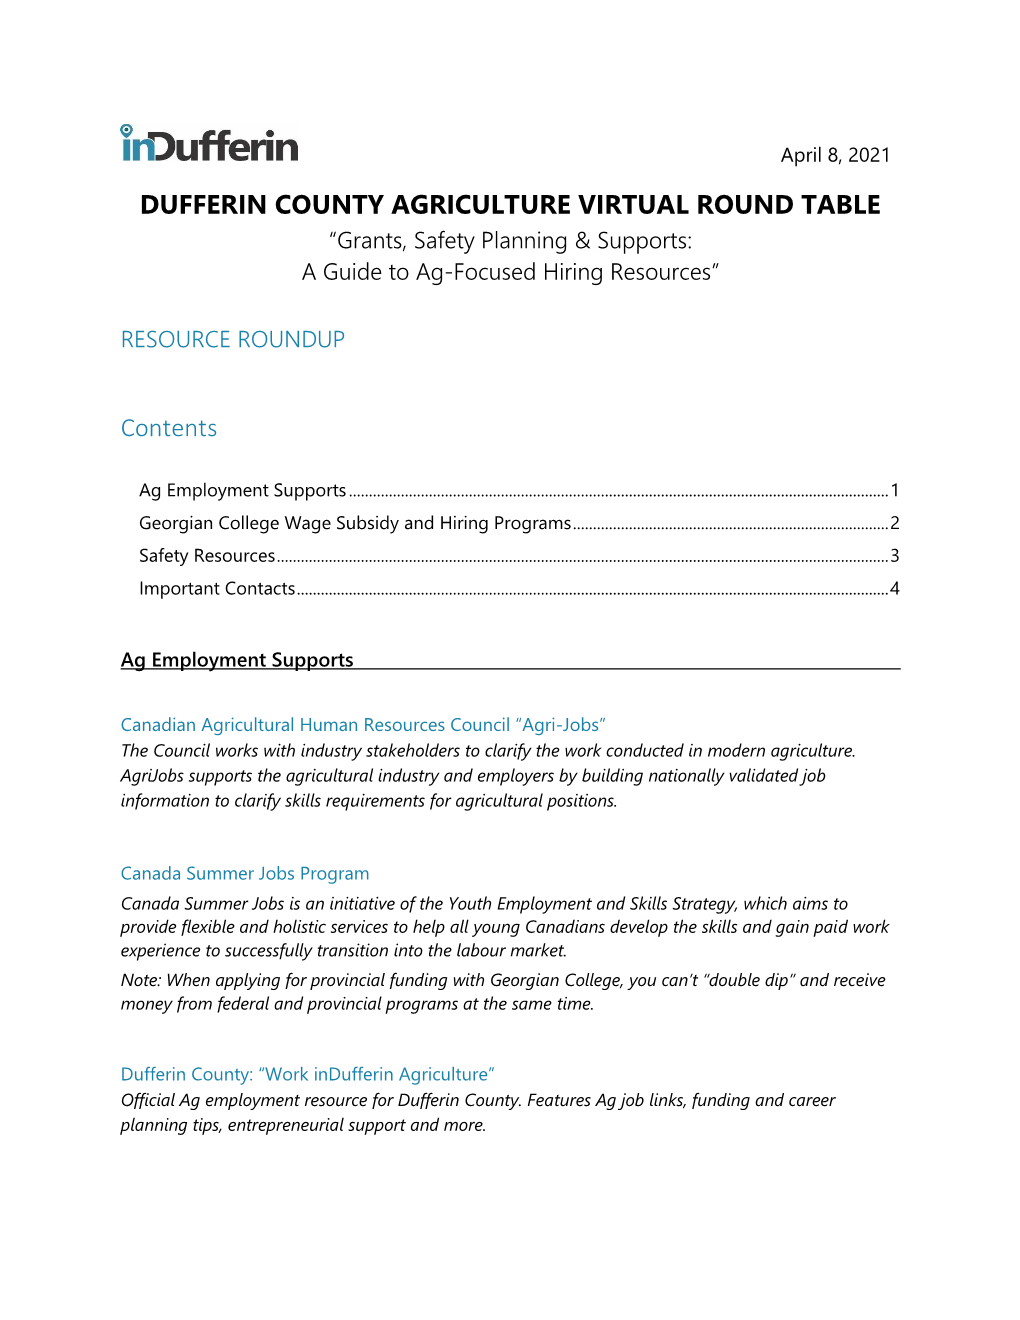 DUFFERIN COUNTY AGRICULTURE VIRTUAL ROUND TABLE Contents